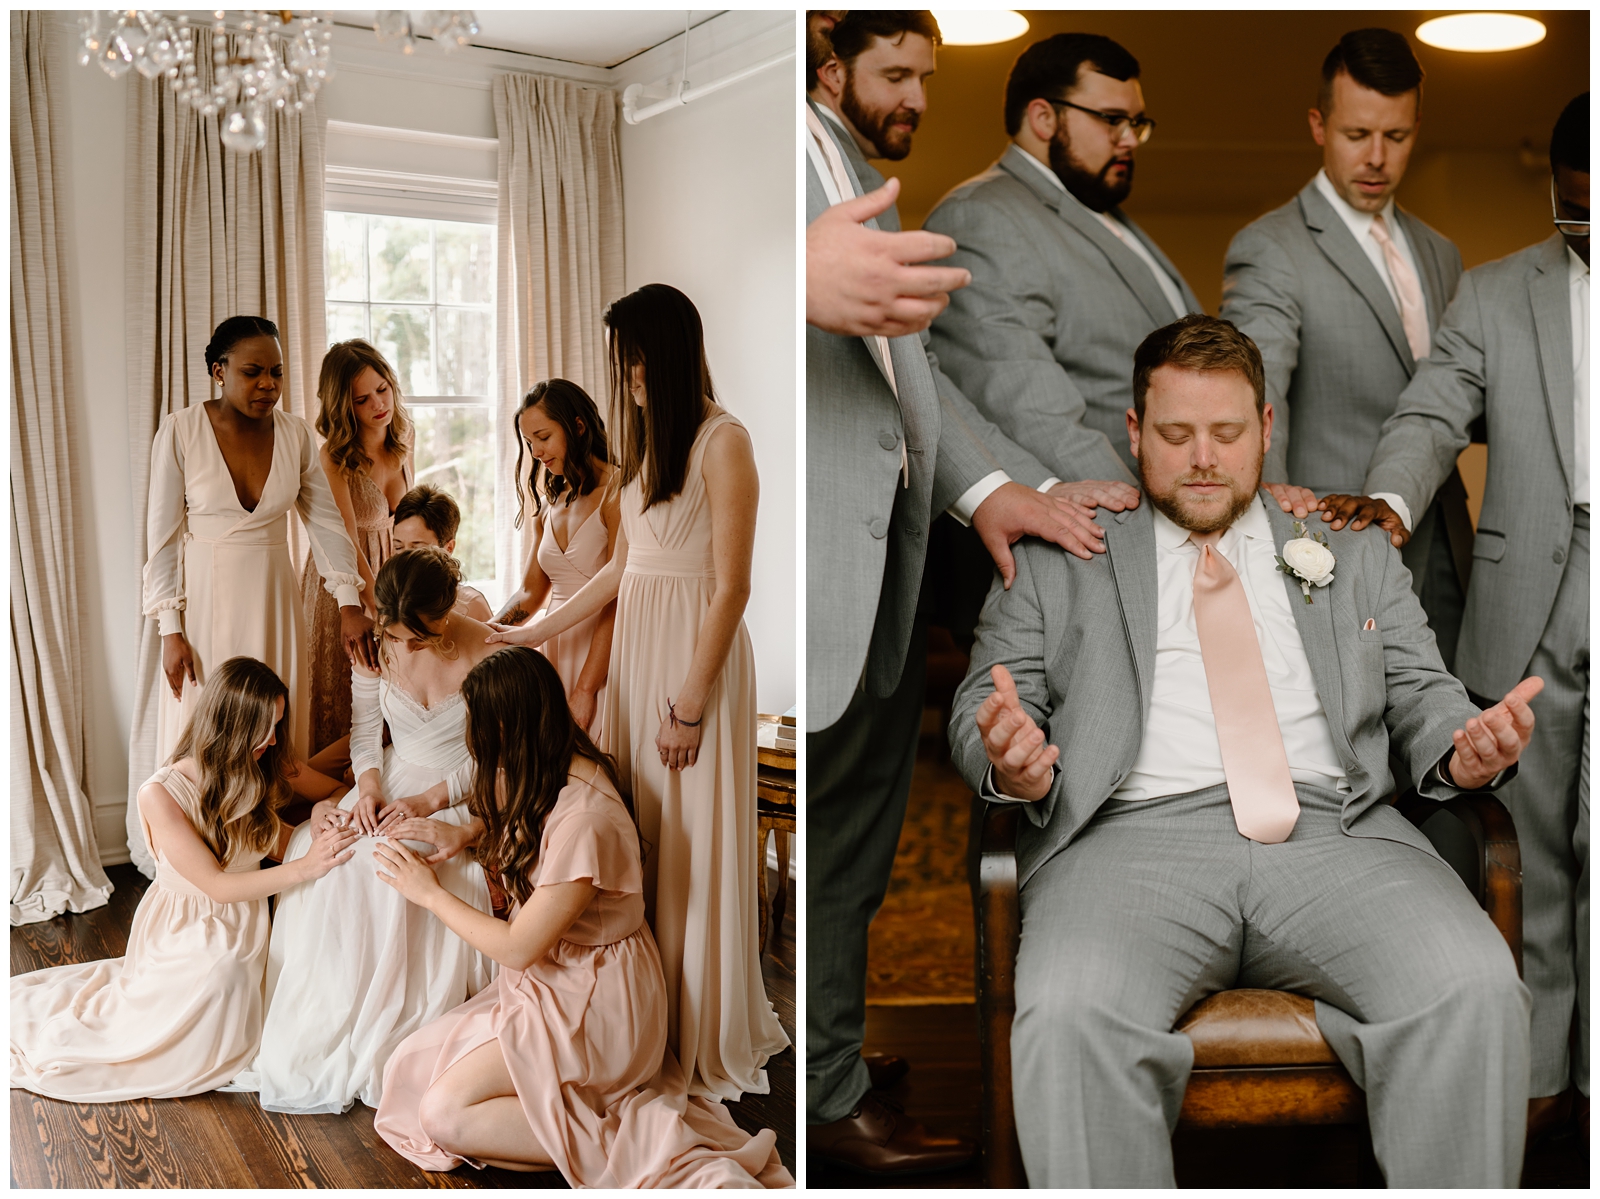 Prayer circle for bride and groom with their wedding party, bridesmaids and groomsmen, at the McAlister-Leftwich House by NC wedding photographer